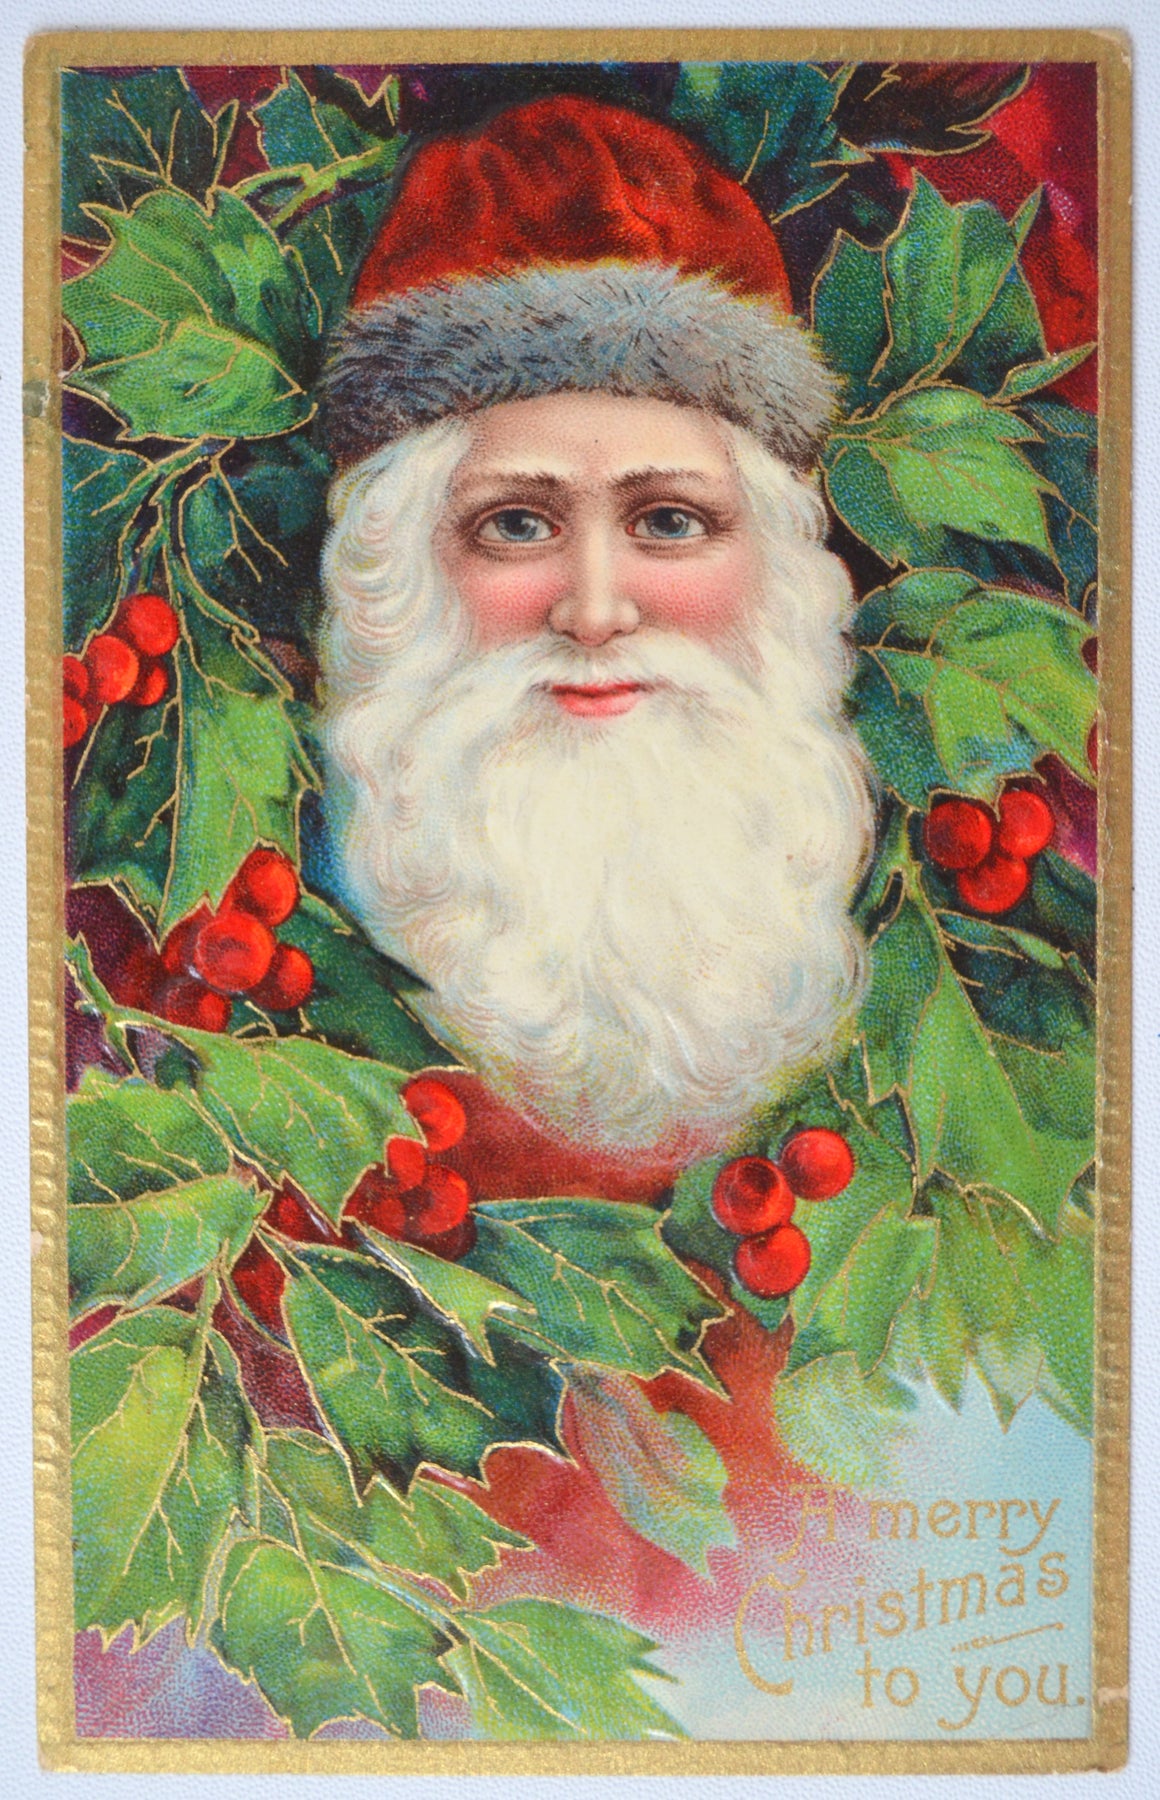 Christmas Postcard Santa Claus Red Suit Holly Plants Series 1480 Germany Embossed Gel Card Gold Embellished